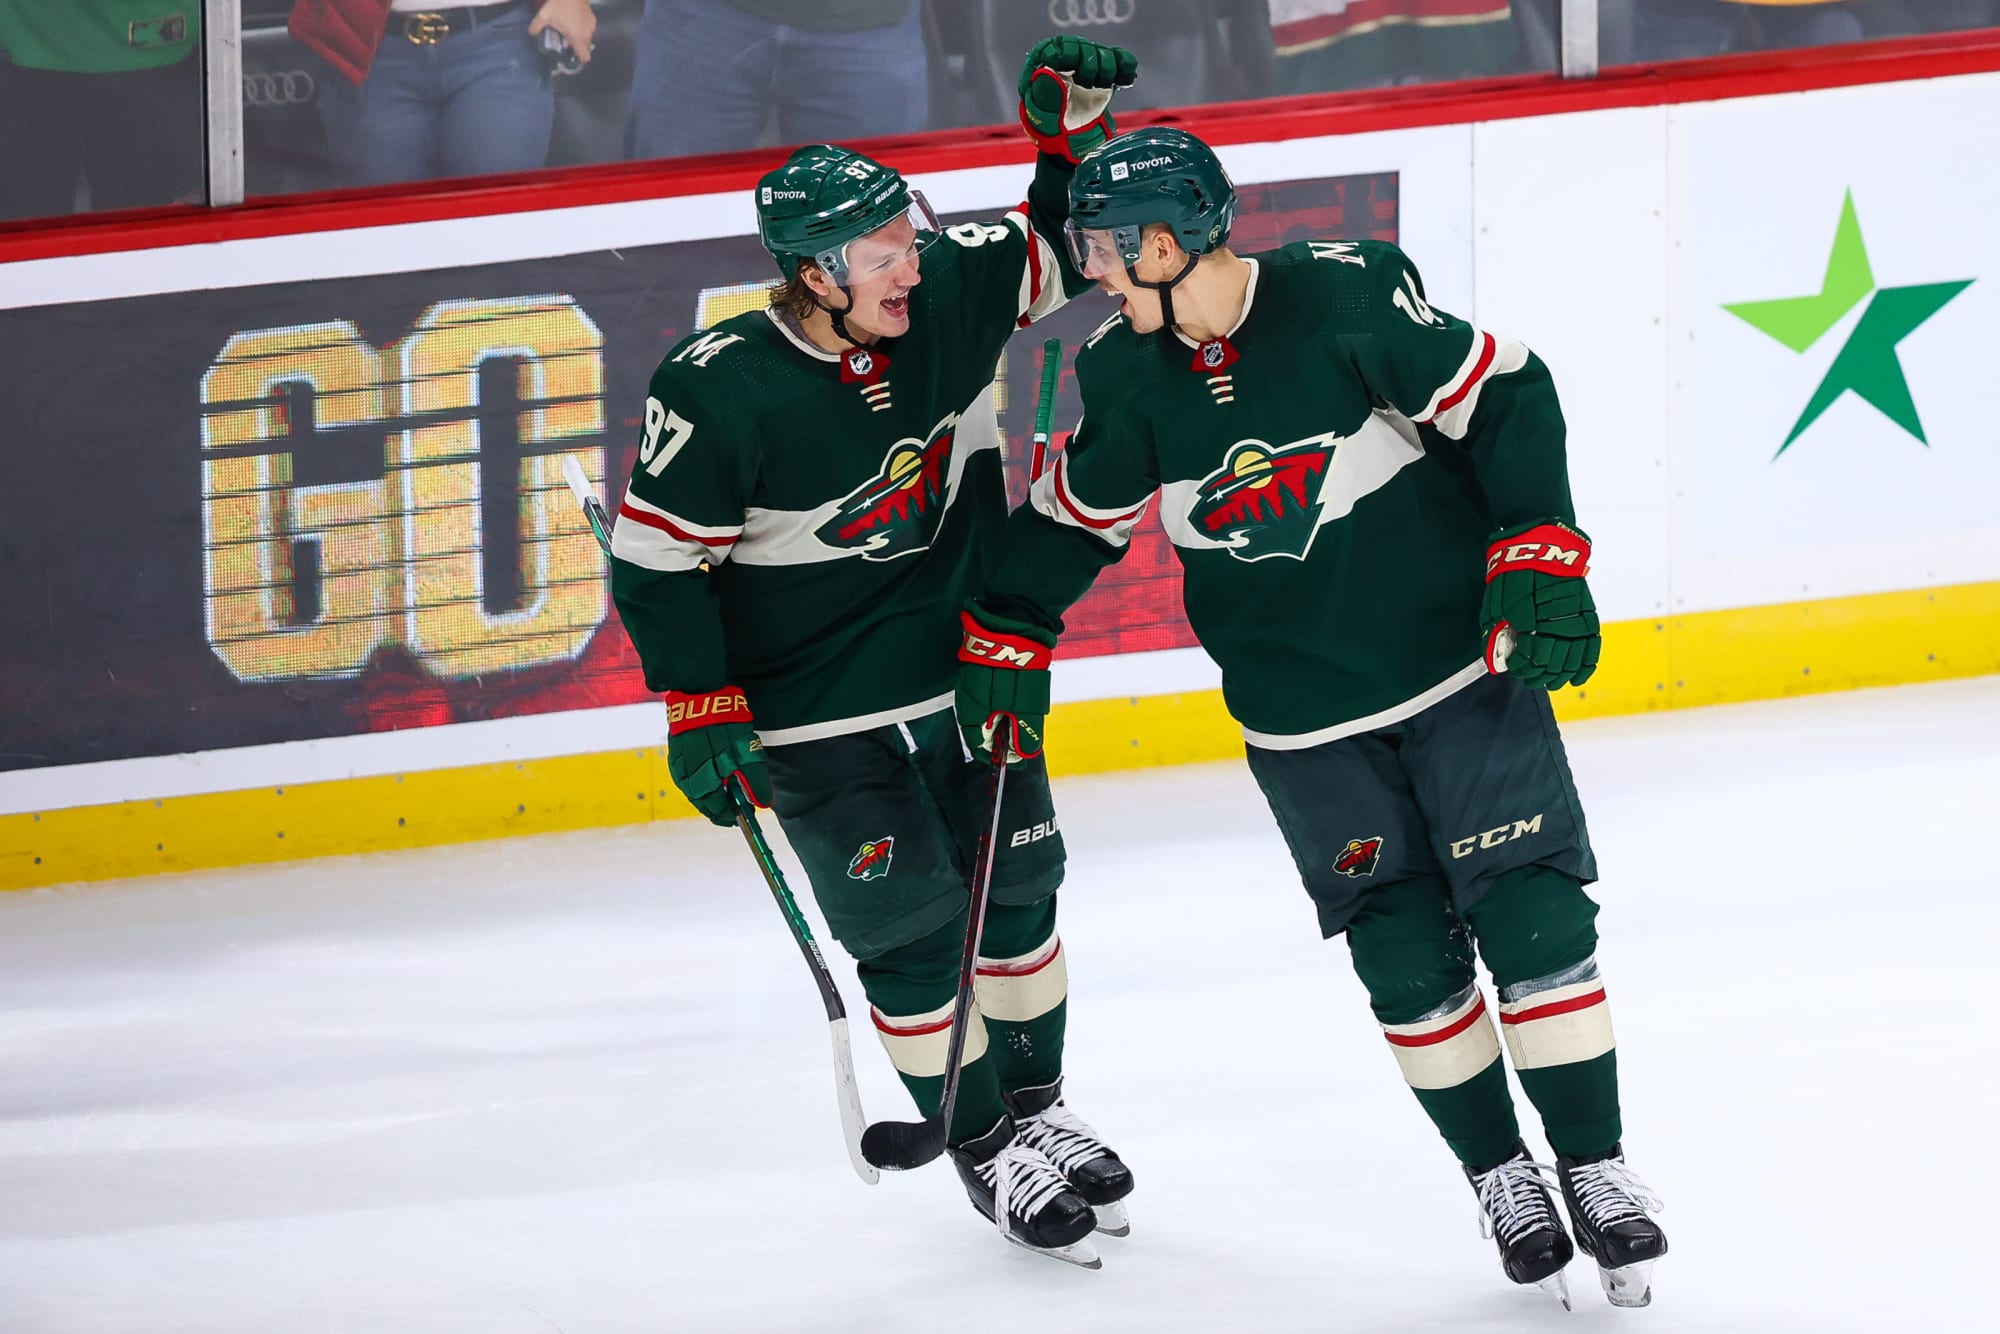 Minnesota Wild show again they are a team to contend with